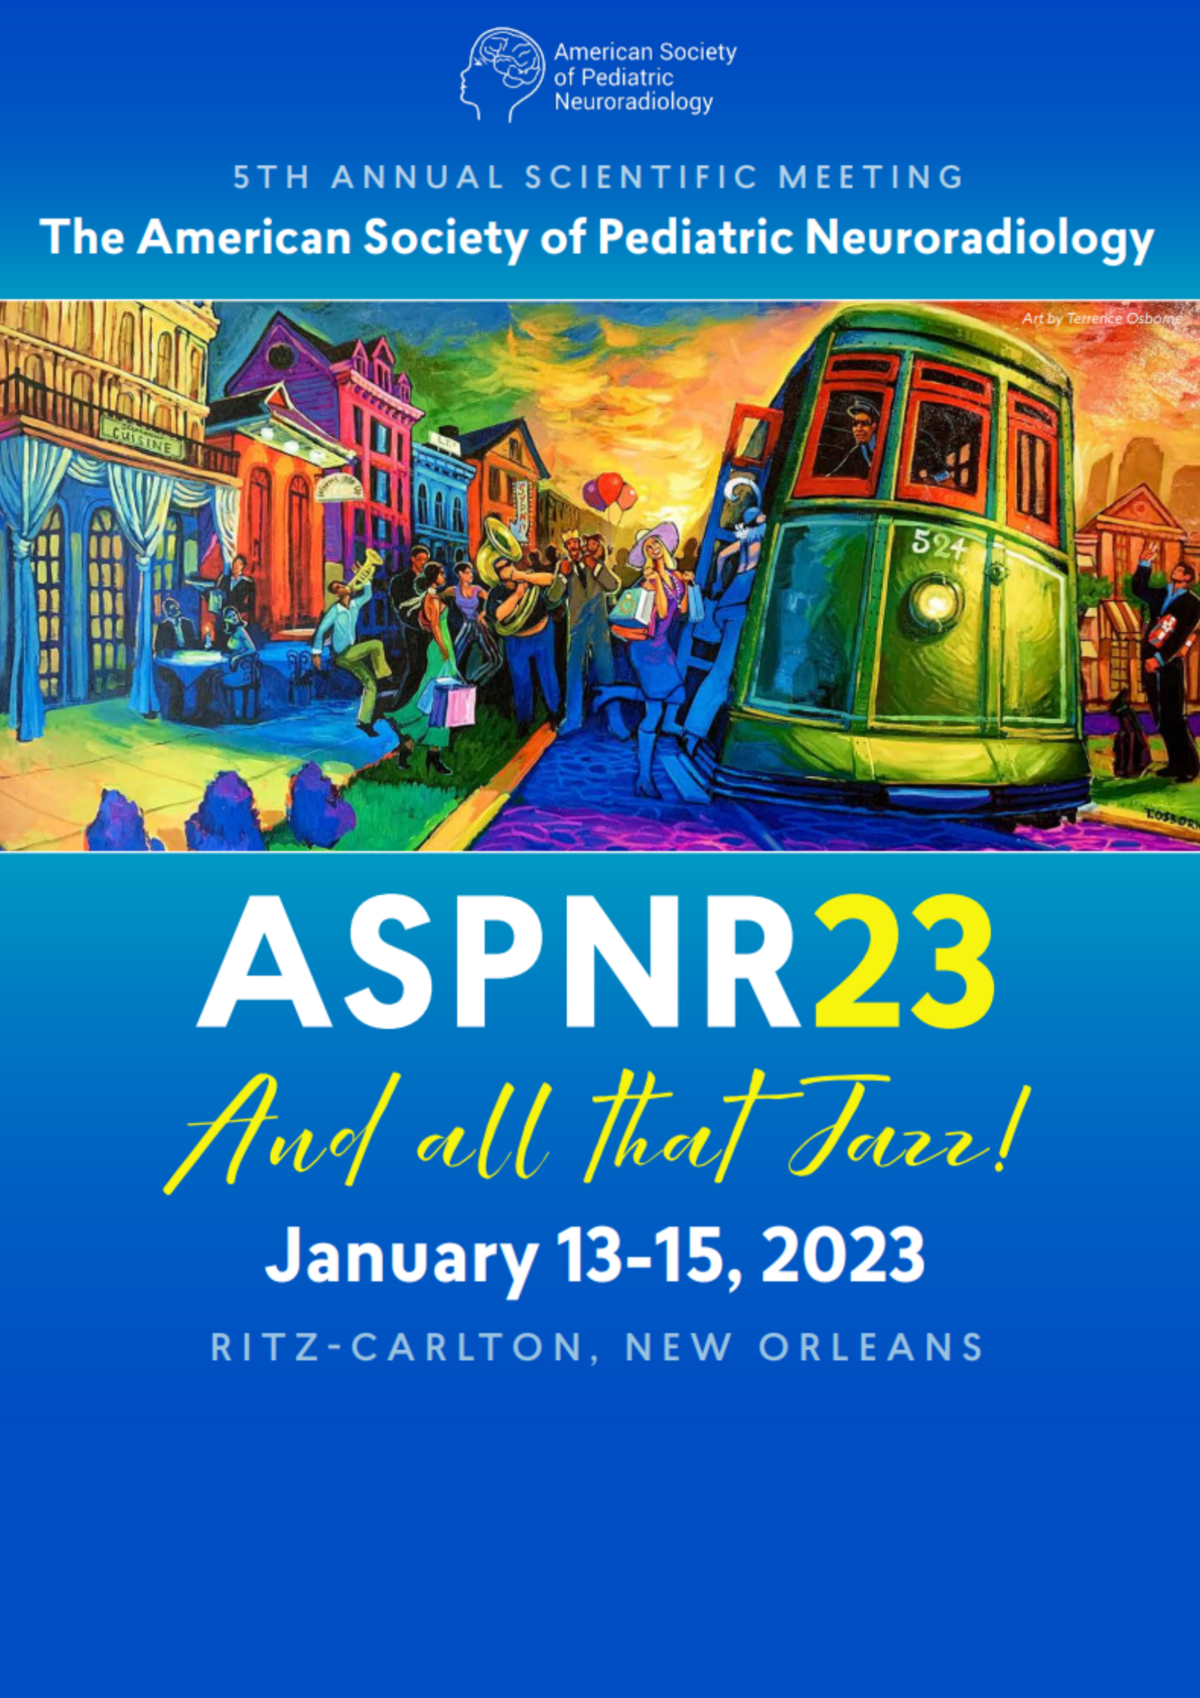 ASPNR 2023 - 5th Annual Scientific Meeting of The American 